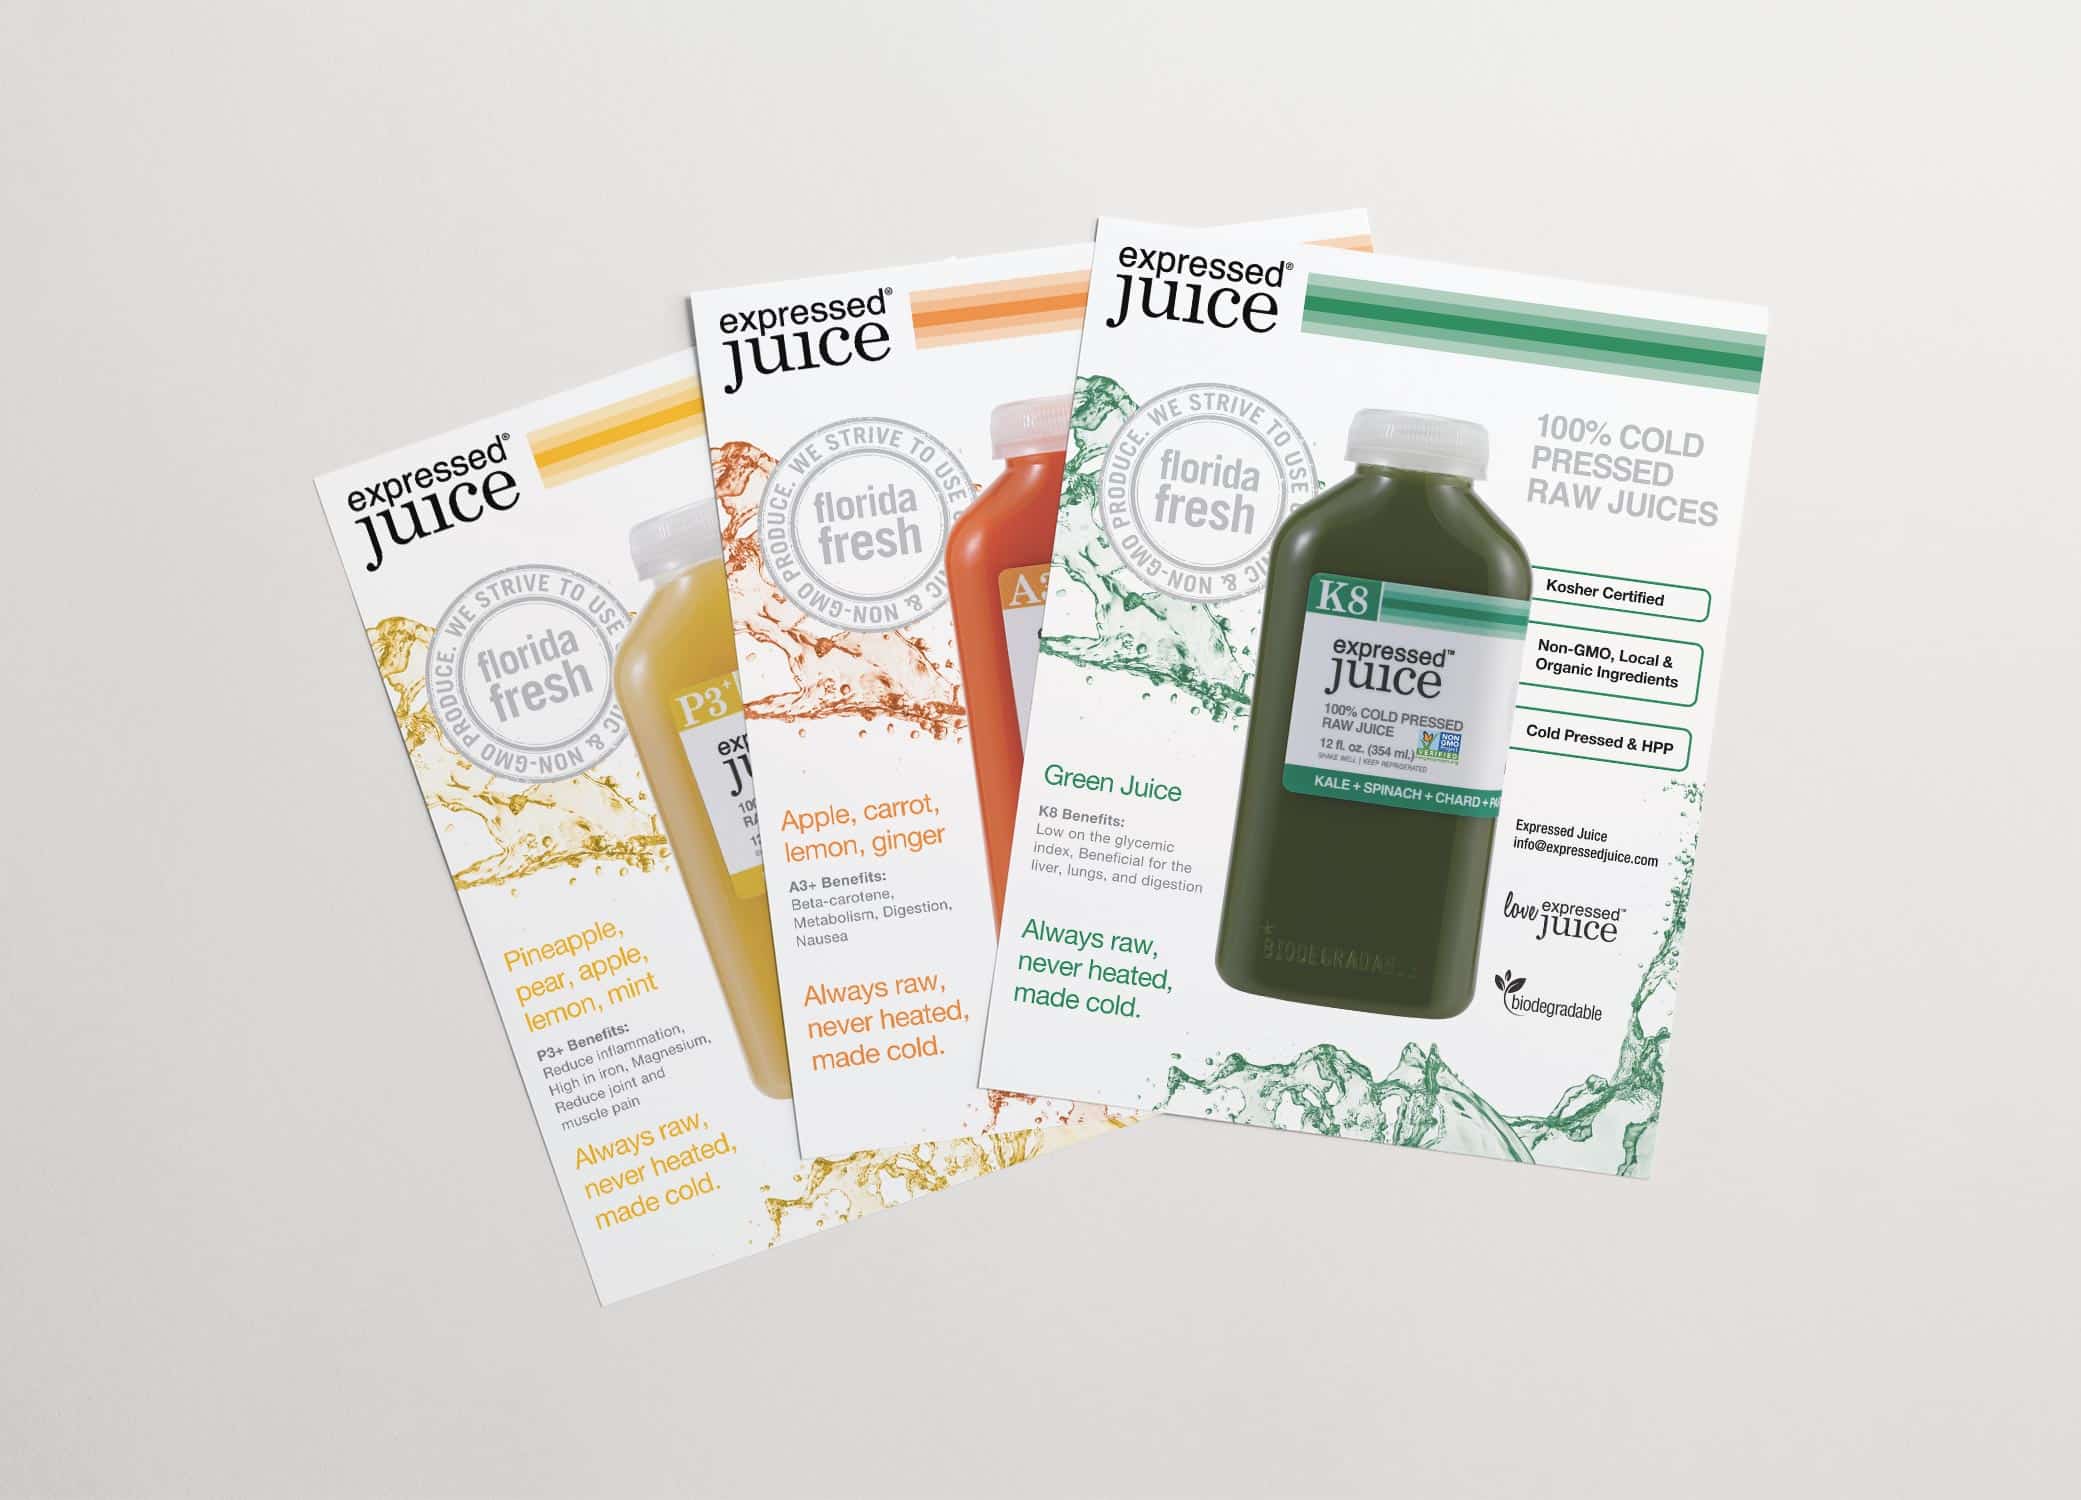 Expressed Juice cruise line flyers providing insight into the brand and offer marketing potential.